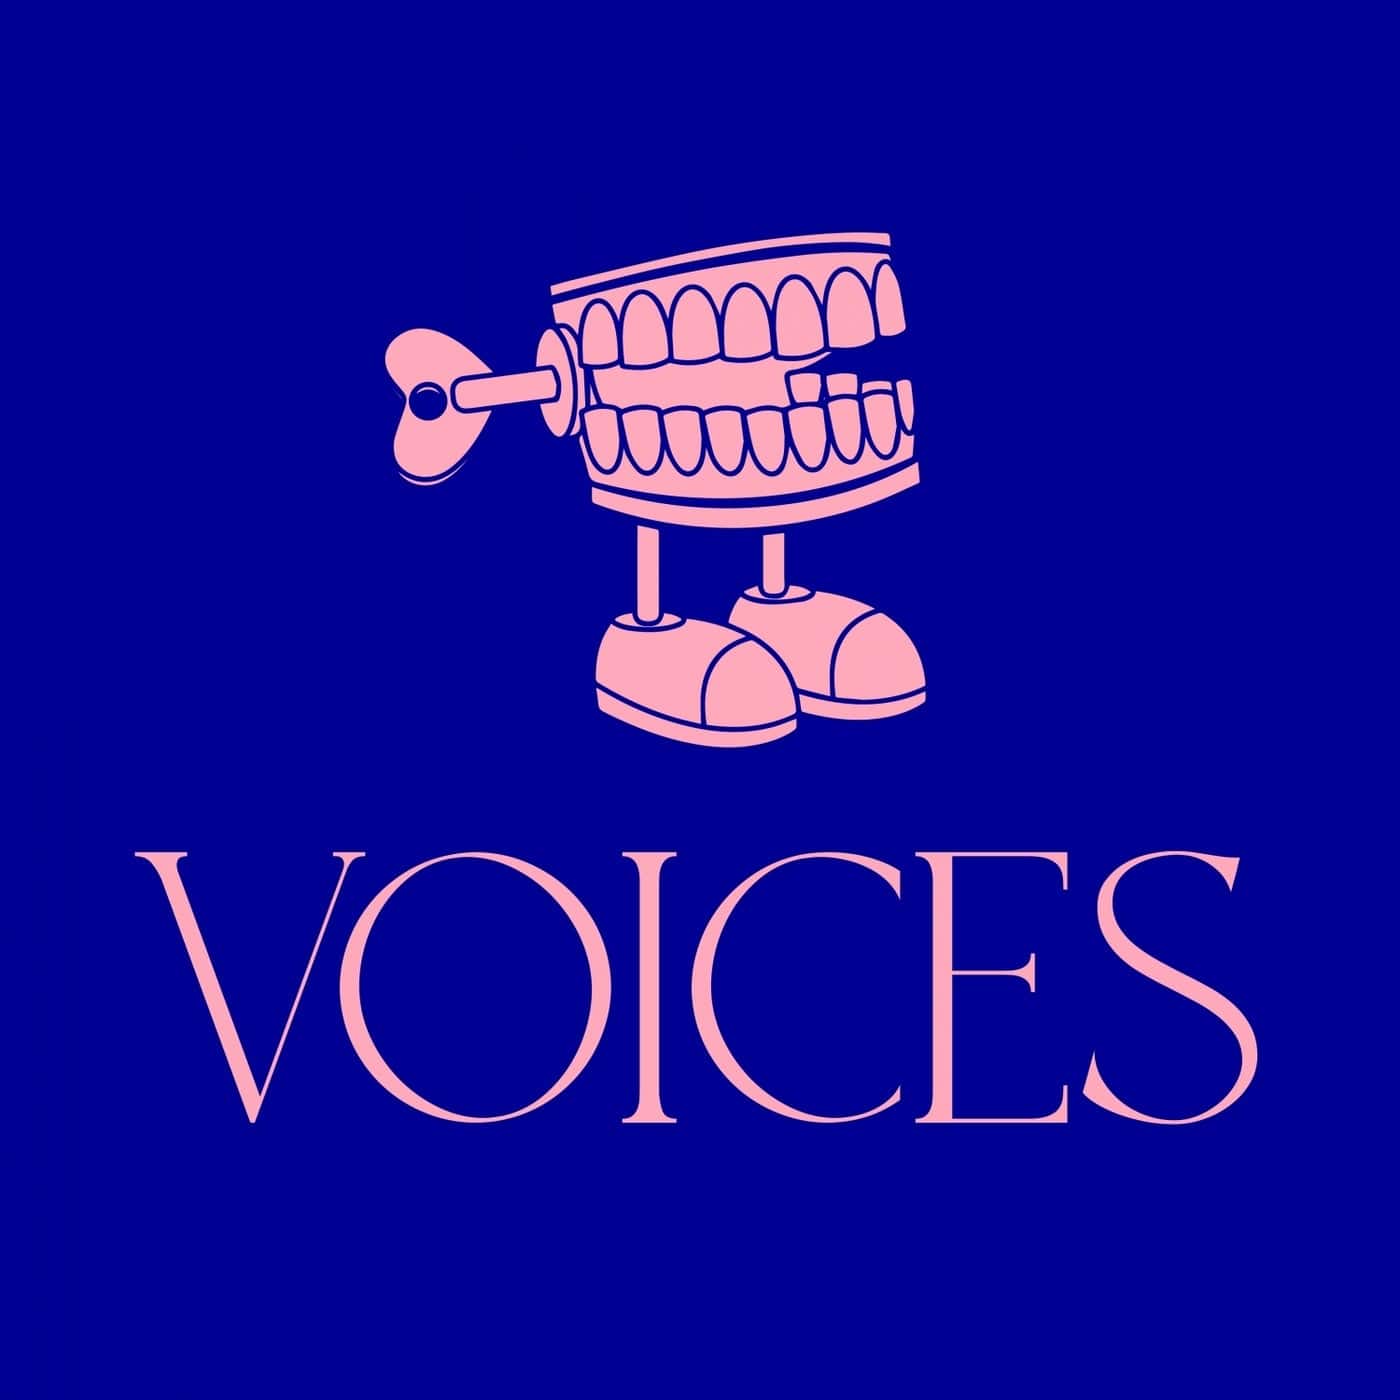 Download Local Singles - Voices on Electrobuzz